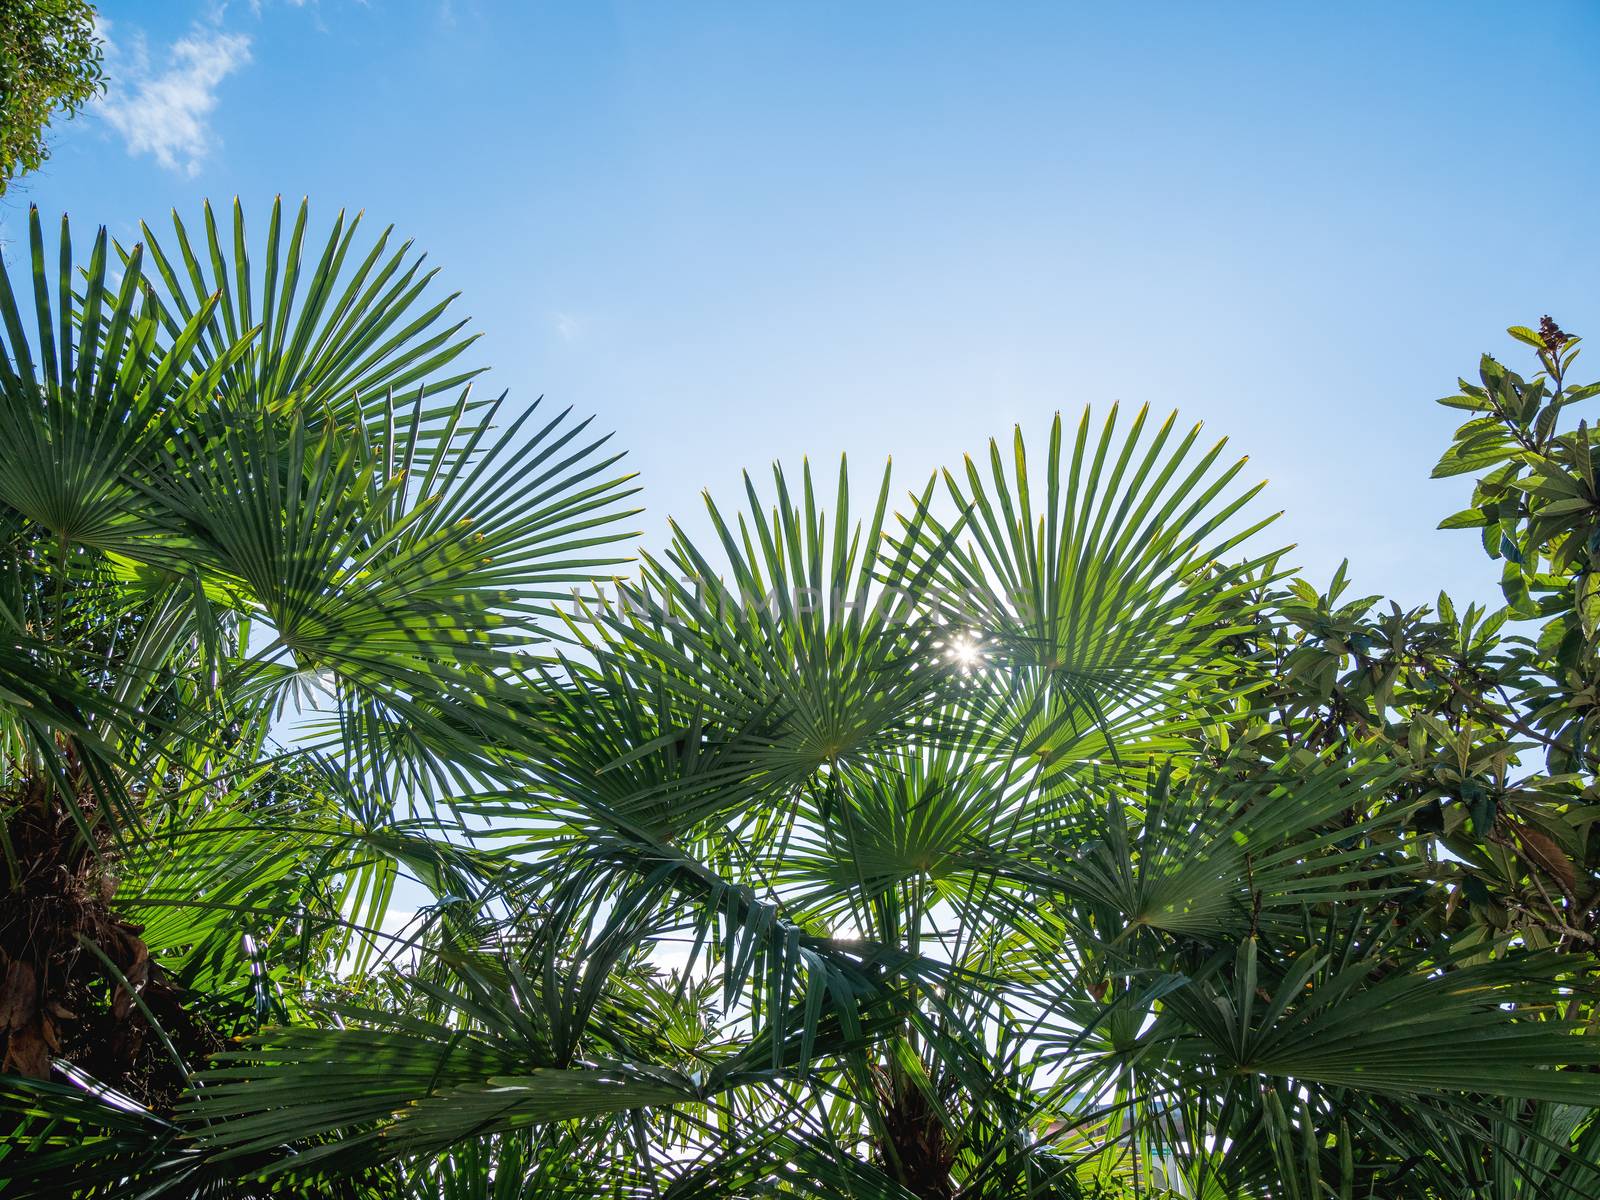 Sun shines on palm trees leaves. Tropical trees with fresh green foliage.